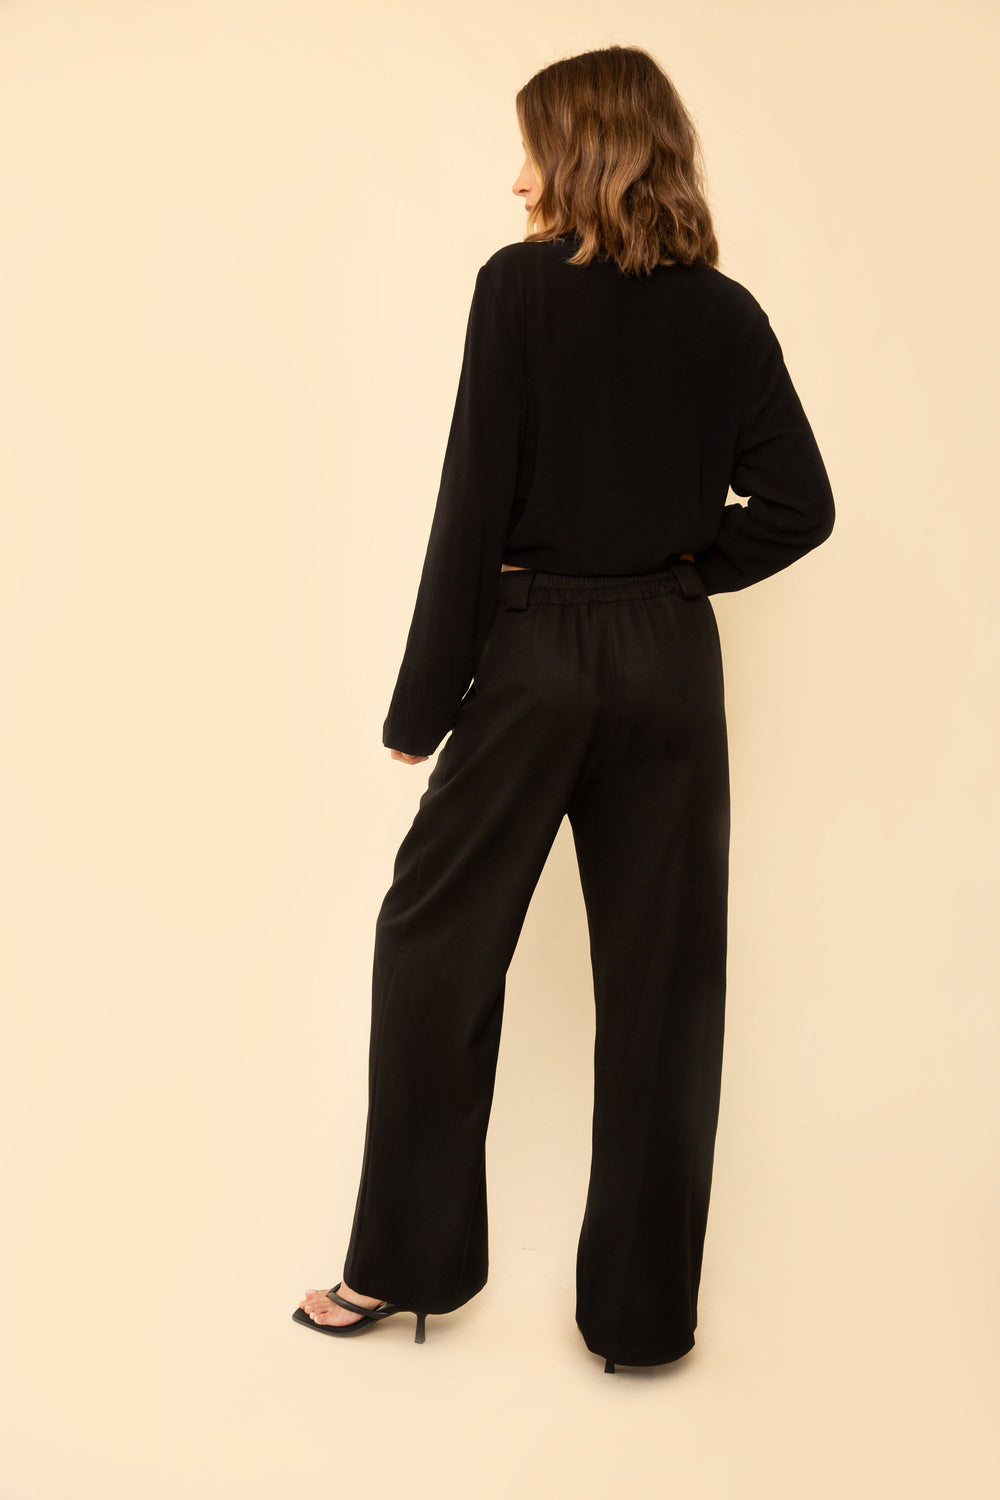 Leanna Pant in Black - Whimsy & Row